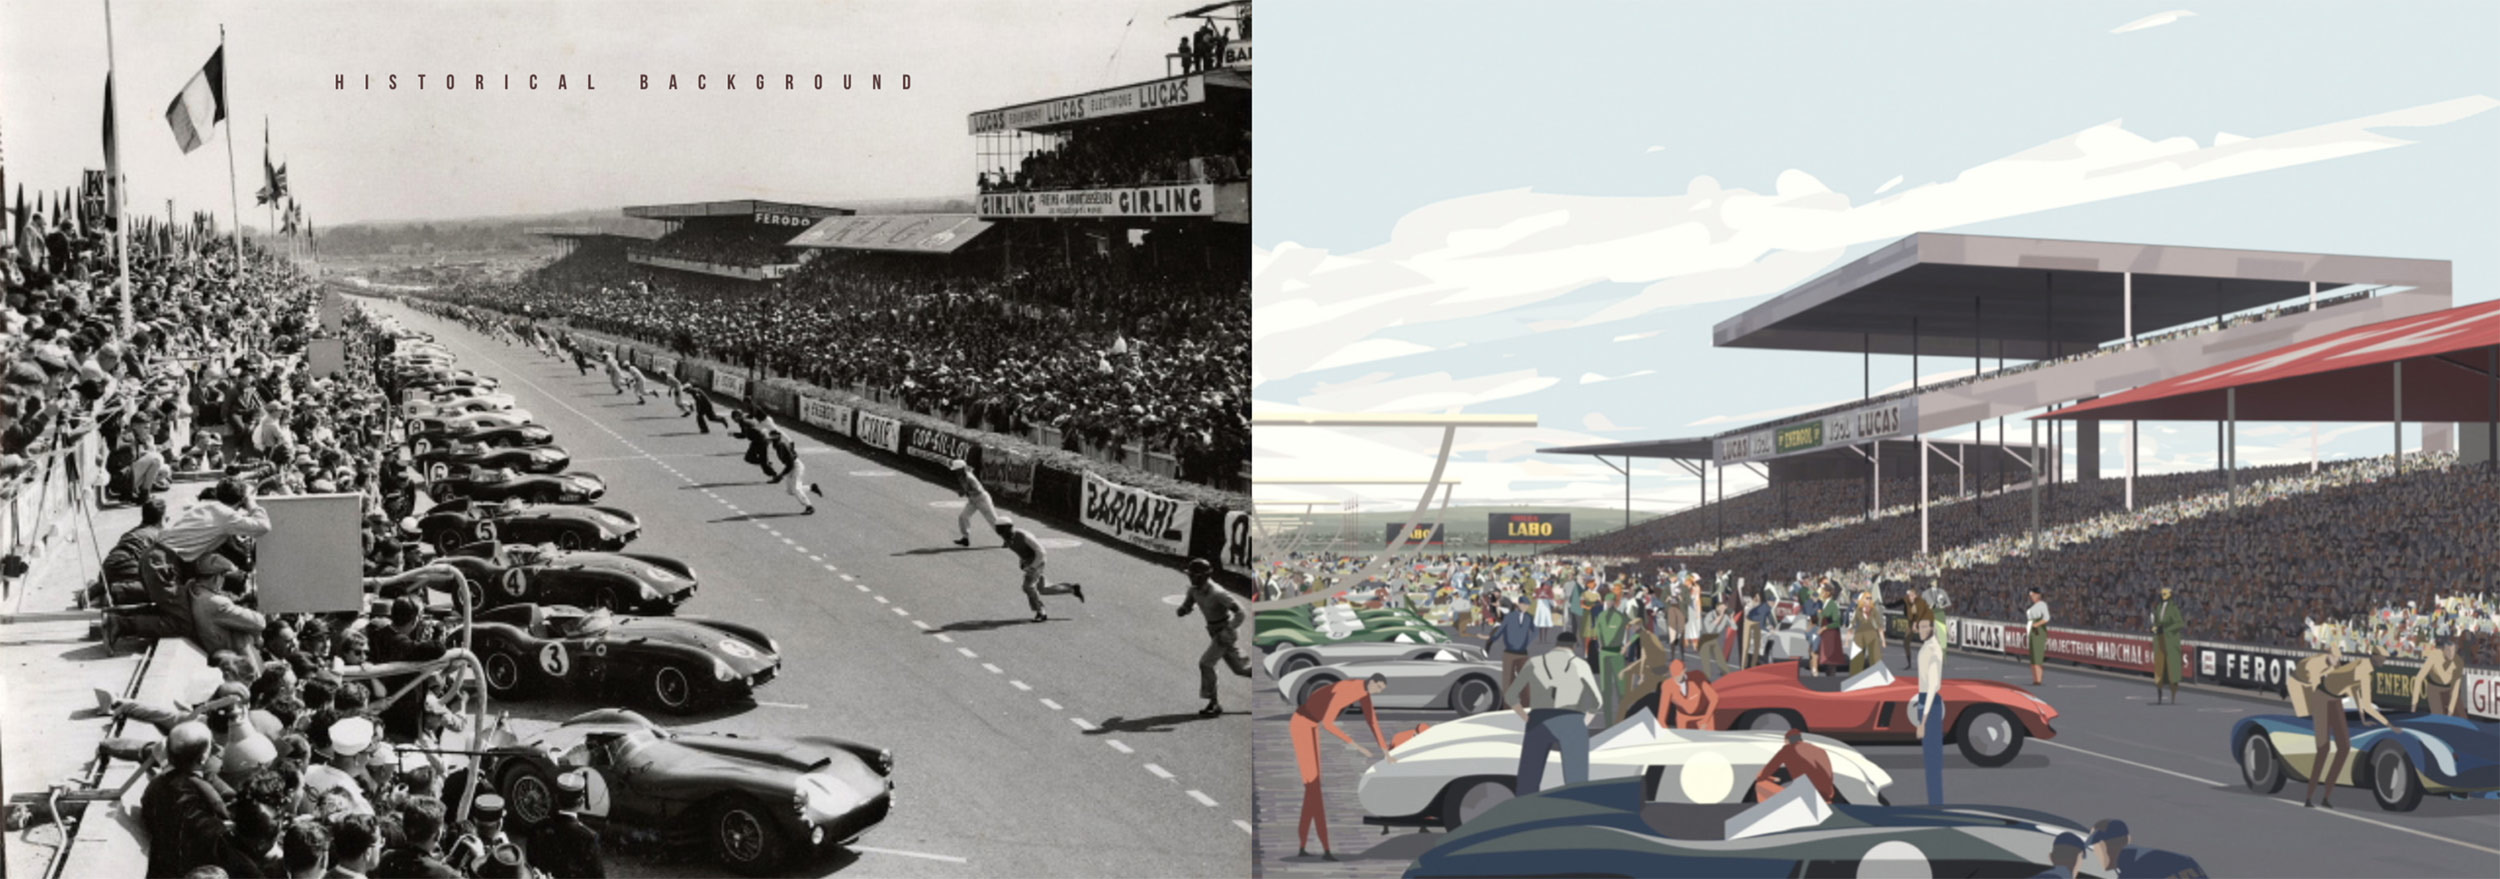 Le Mans film, Animated film examines 1955 Le Mans tragedy, ClassicCars.com Journal